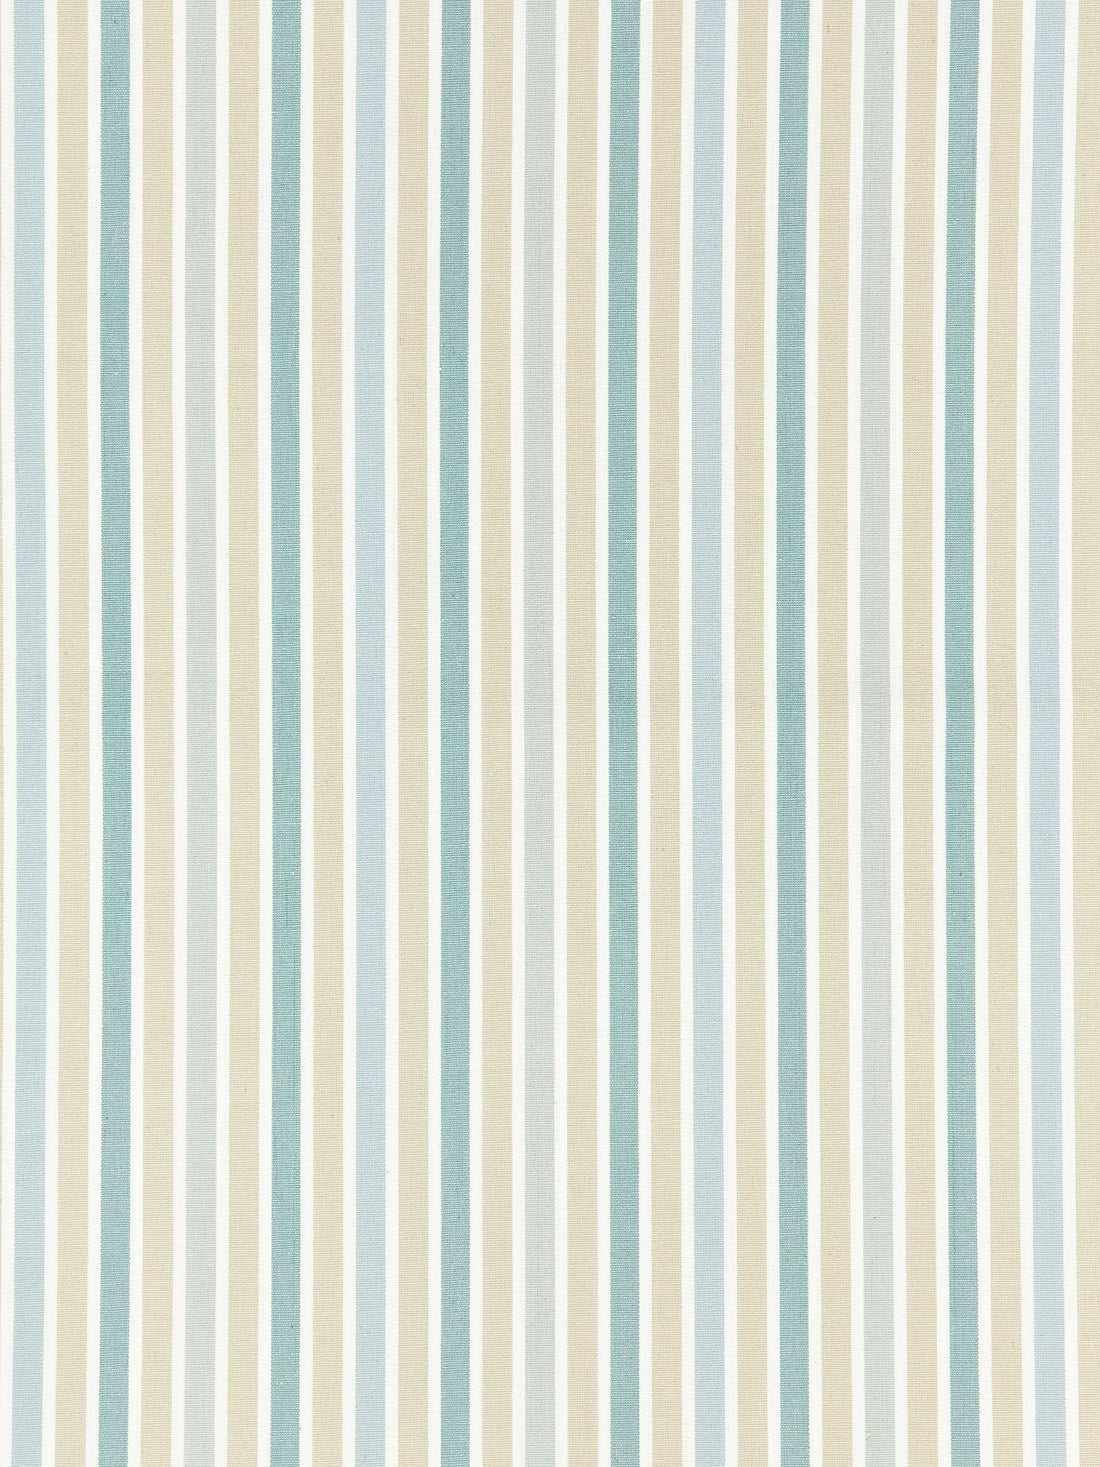 Leeds Cotton Stripe fabric in seaglass color - pattern number SC 000127114 - by Scalamandre in the Scalamandre Fabrics Book 1 collection